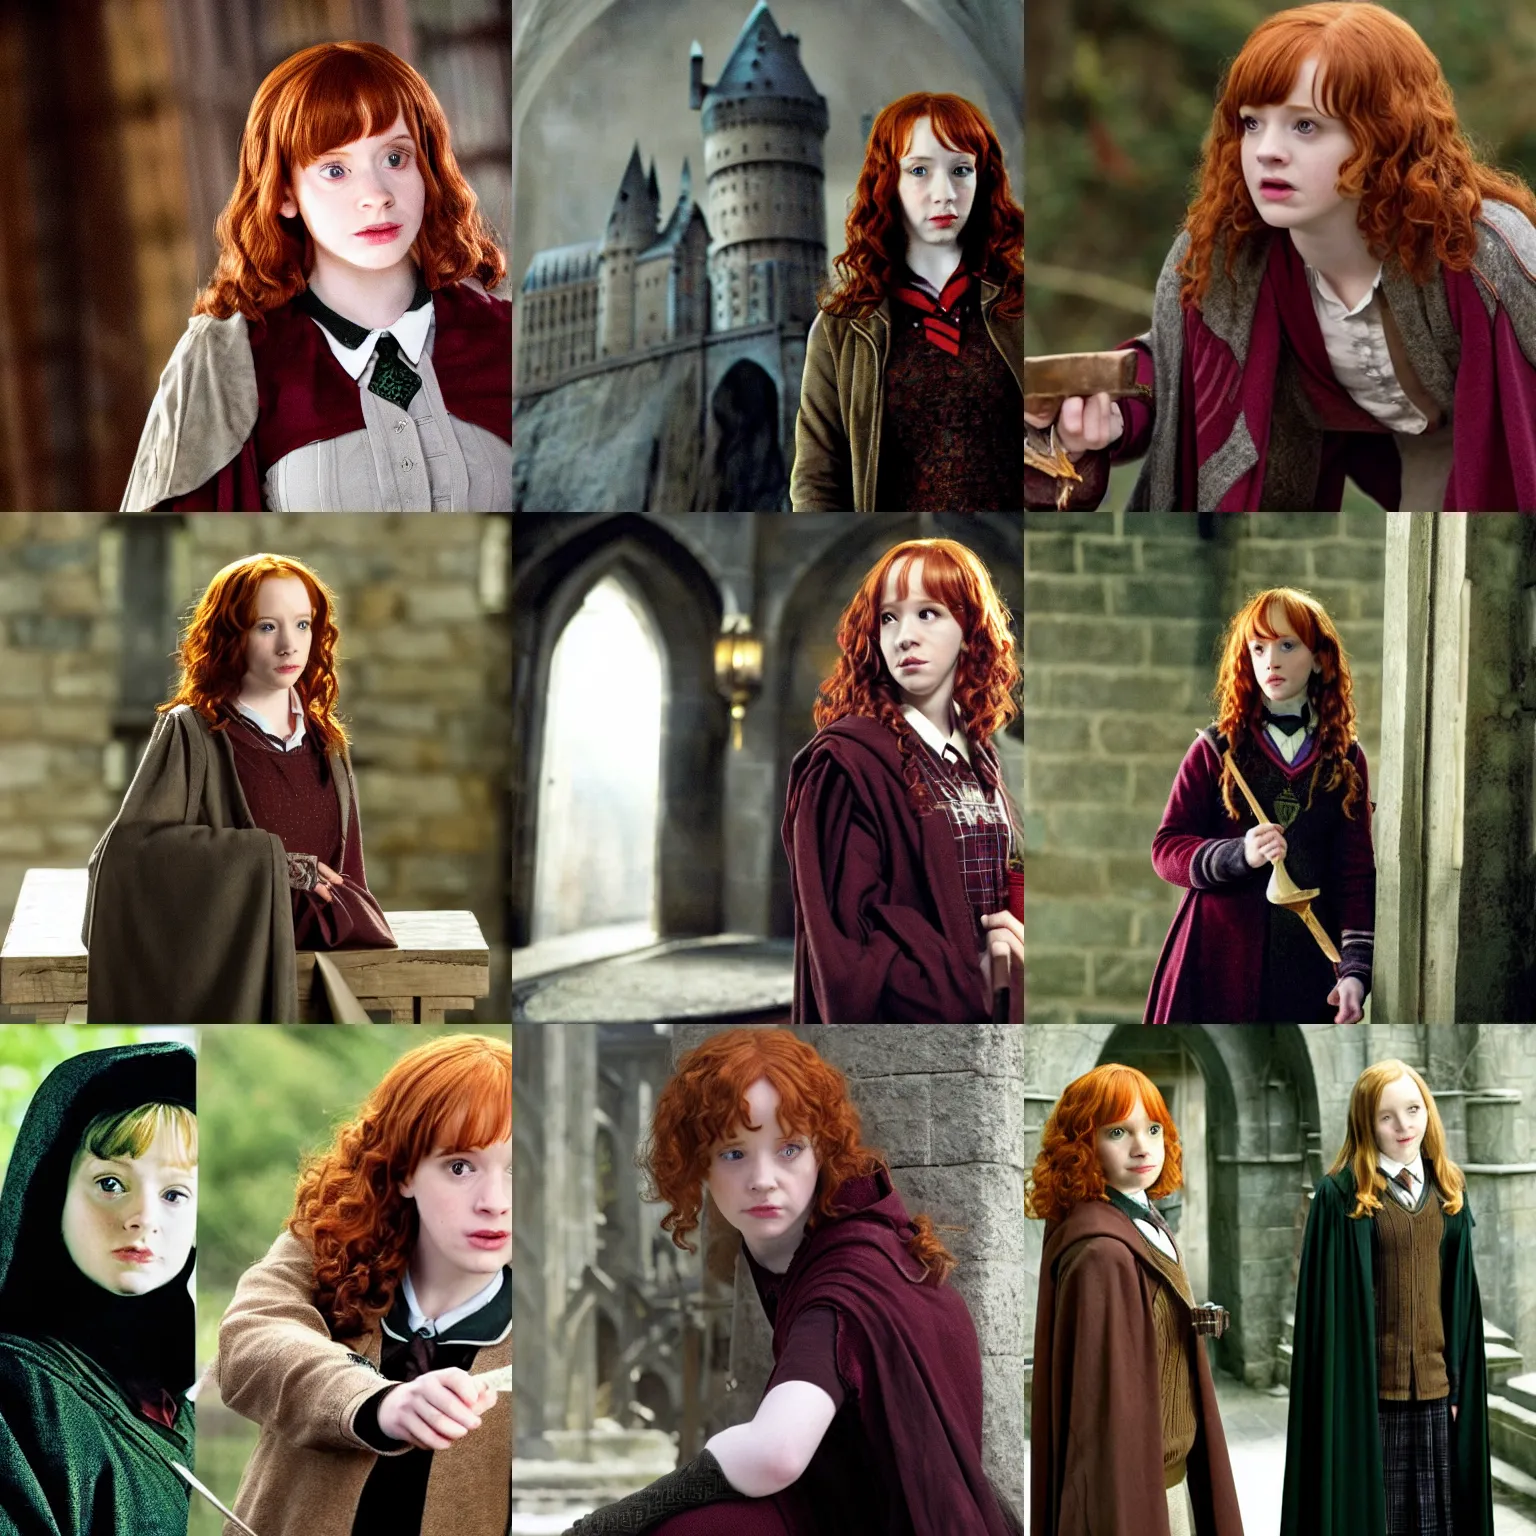 Prompt: female hogwarts student played by young christina hendricks, movie still harry potter and the deathly hallows by david yates